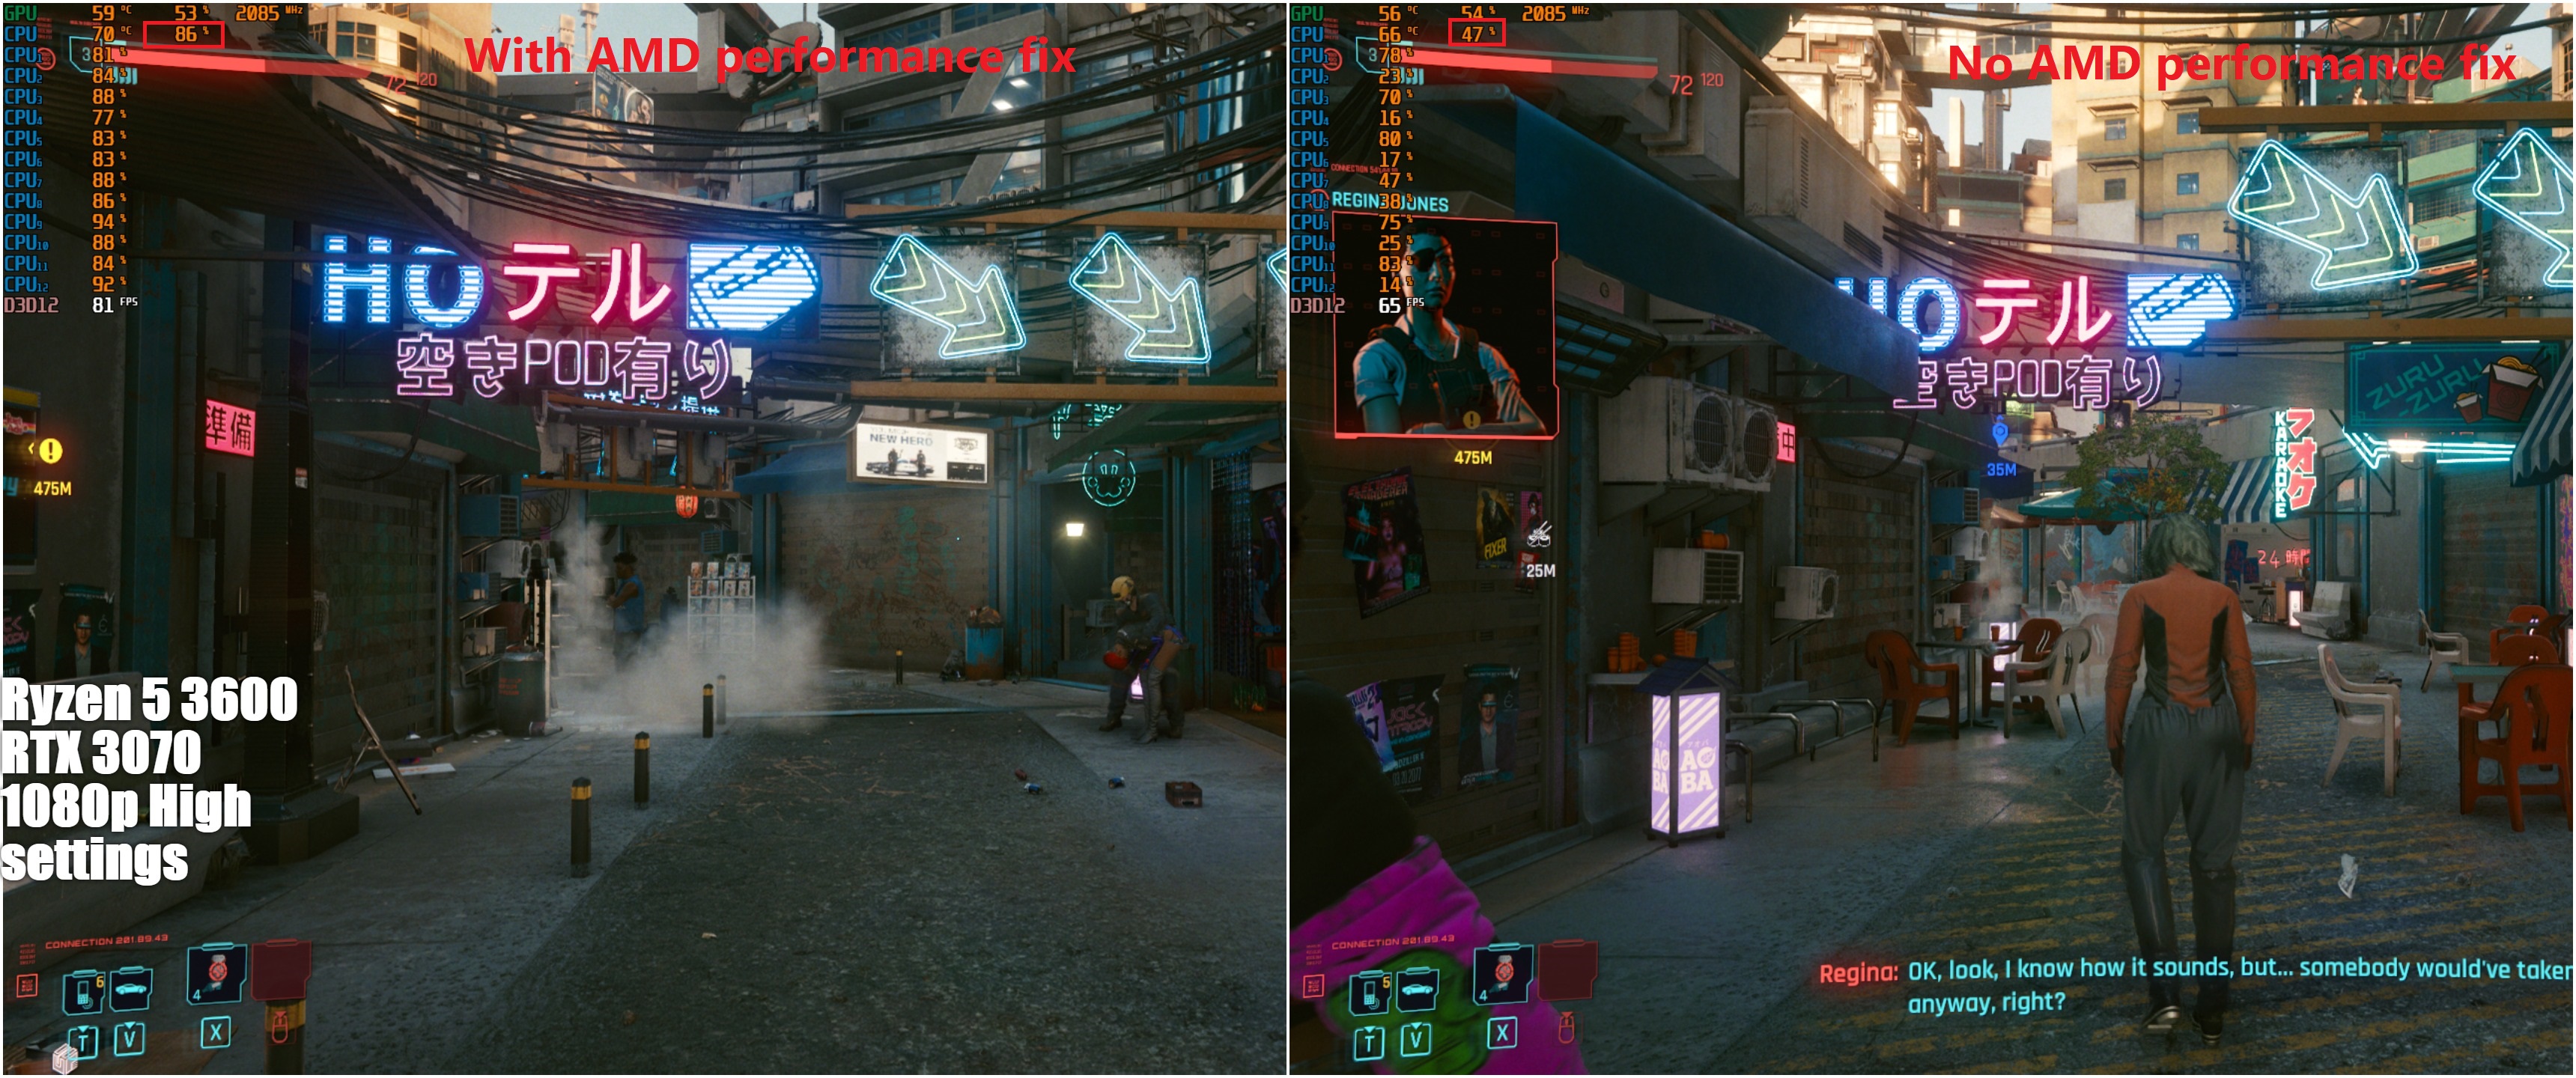 Cyberpunk 2077 Now Has Multiple Edgerunners Locations, Thanks To Mod